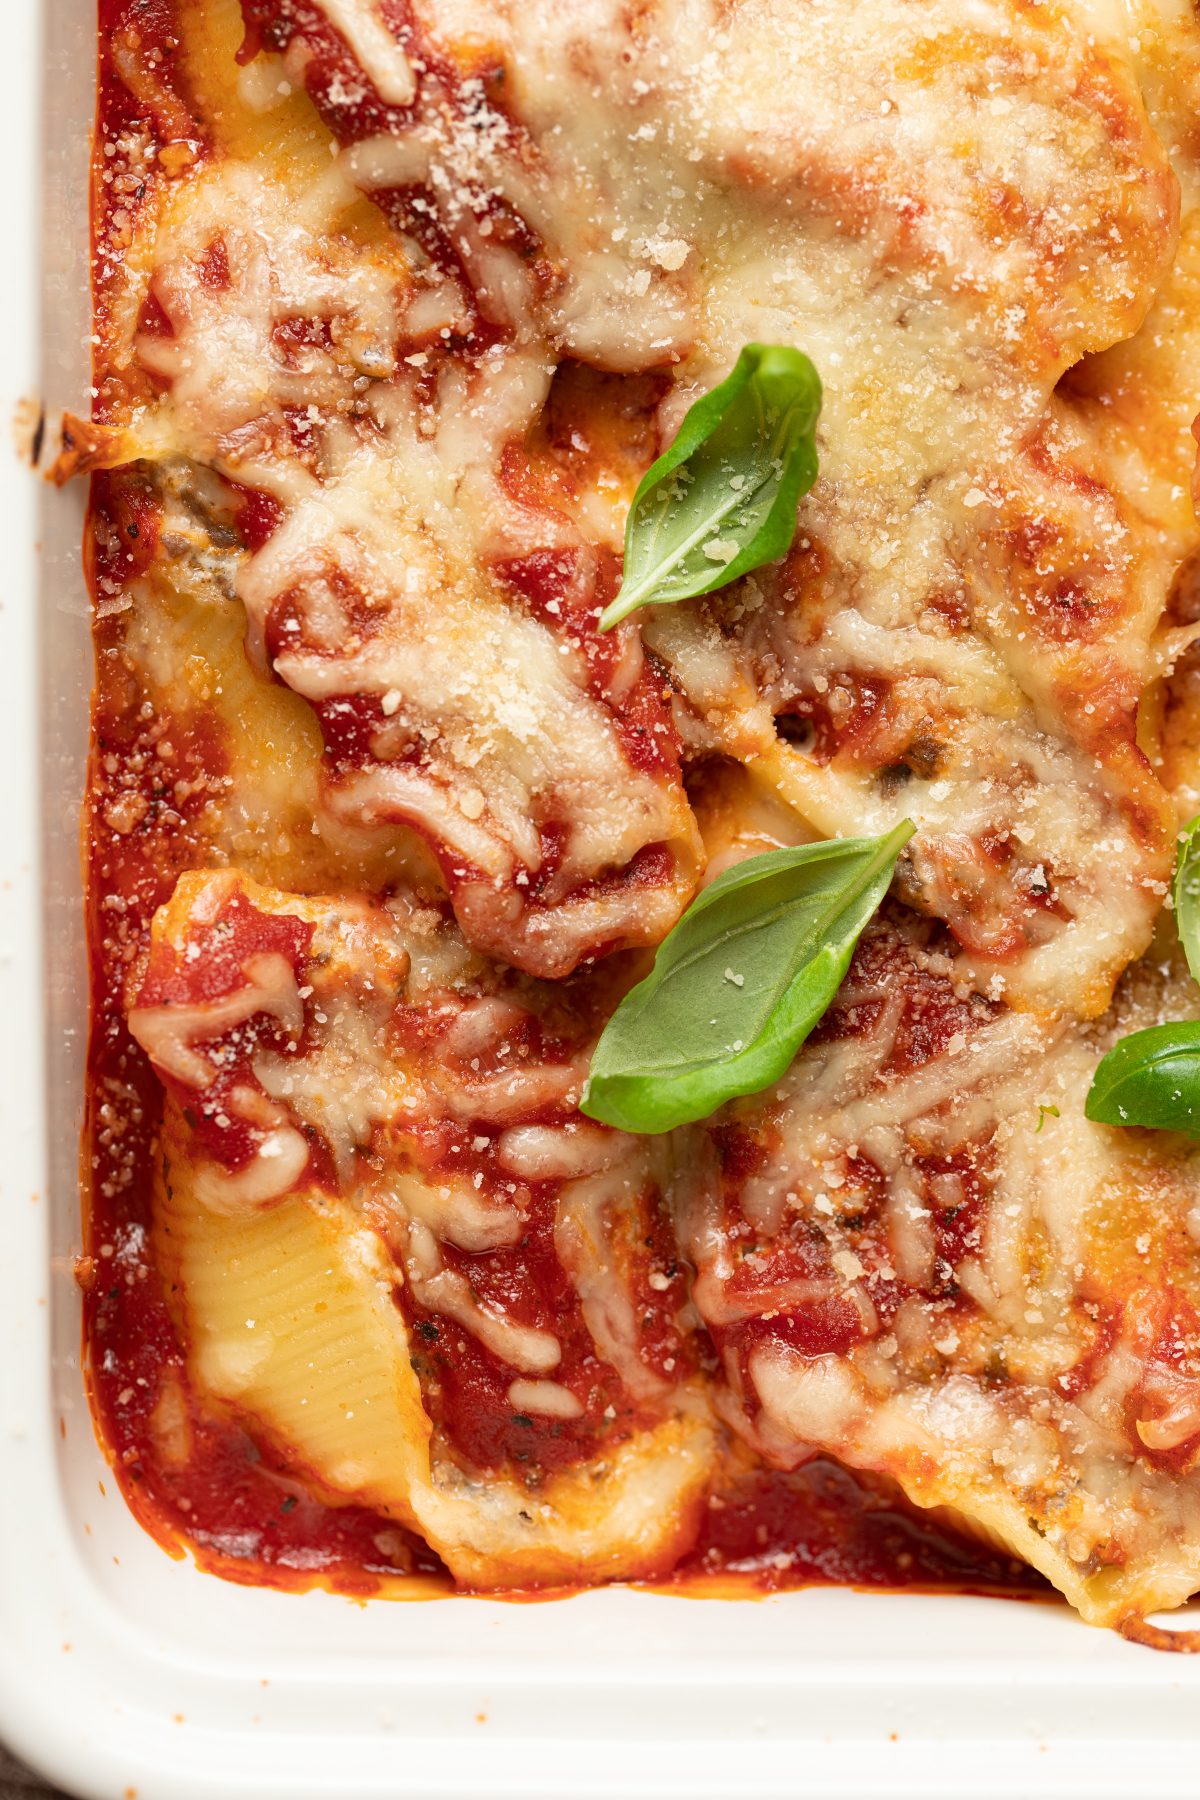 Stuffed Shells with Meat